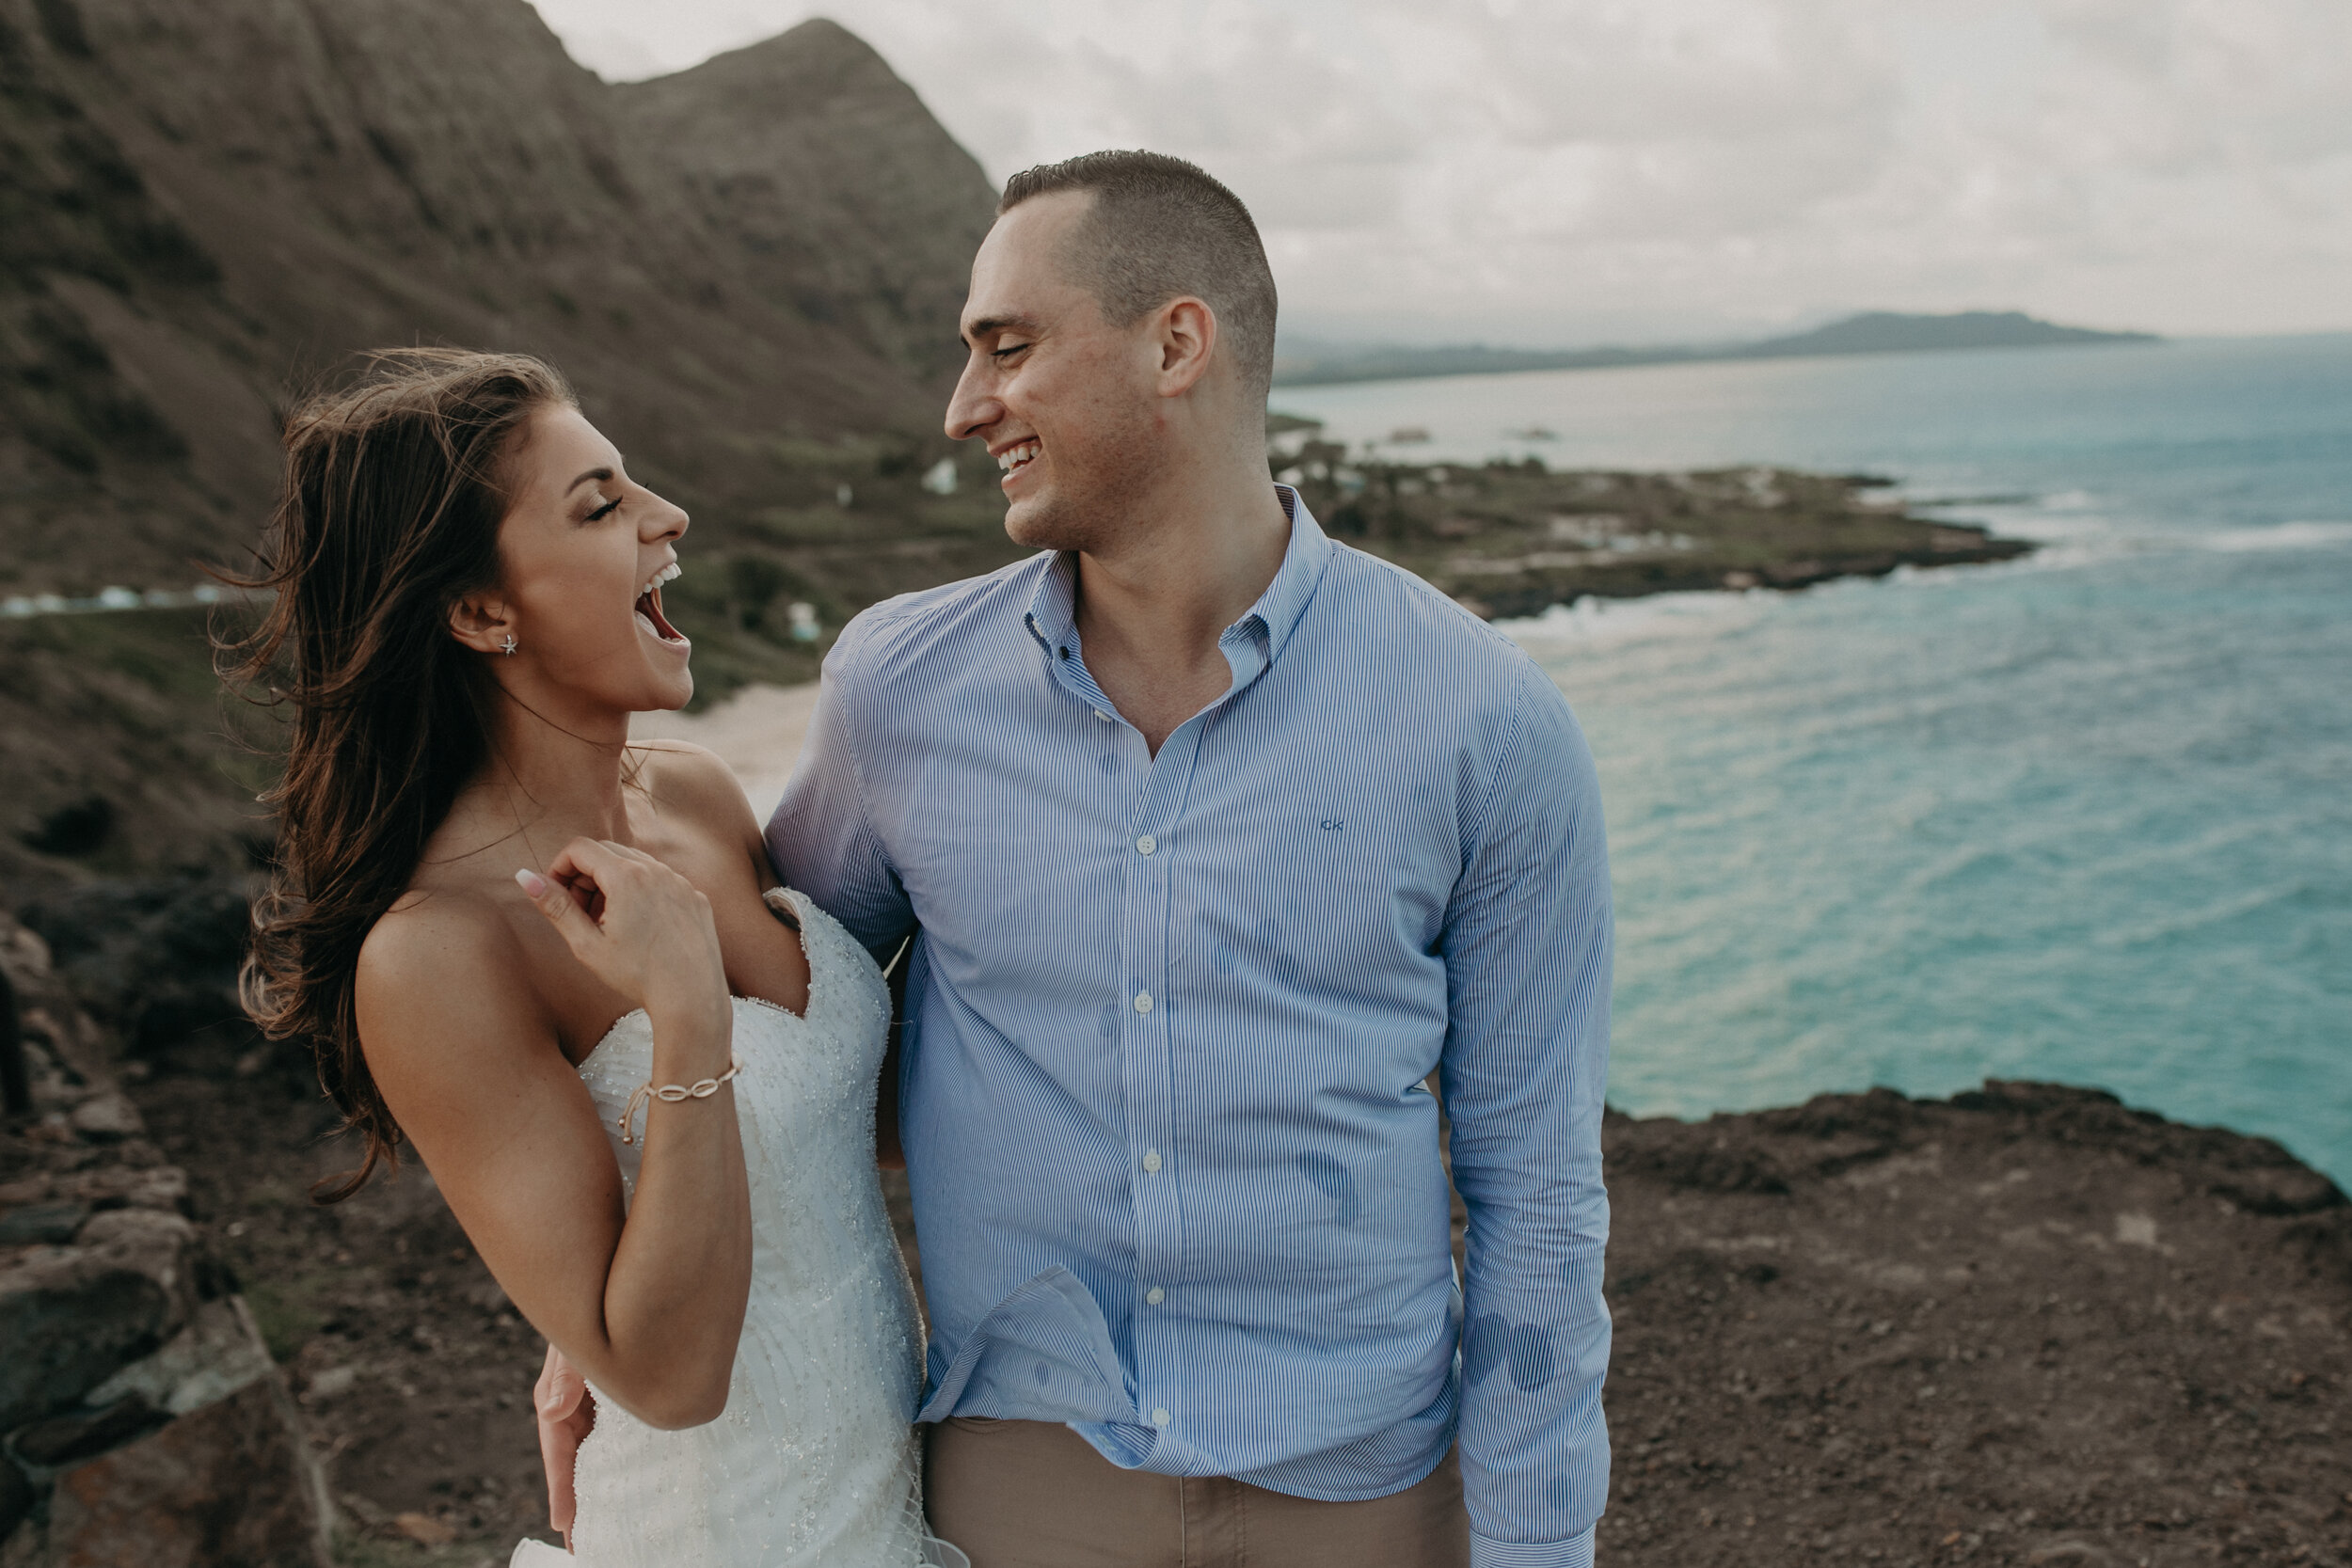  a couple elopes with photographer Andrea Wagner to Oahu Hawaii and Makapuu Lookout #elopetohawaii #hawaiielopement #oahuelopement #oahuweddingphotographer #weddingdestinations #hawaiiweddingphotographer #hawaiielopementphotographer #makapuulookout #